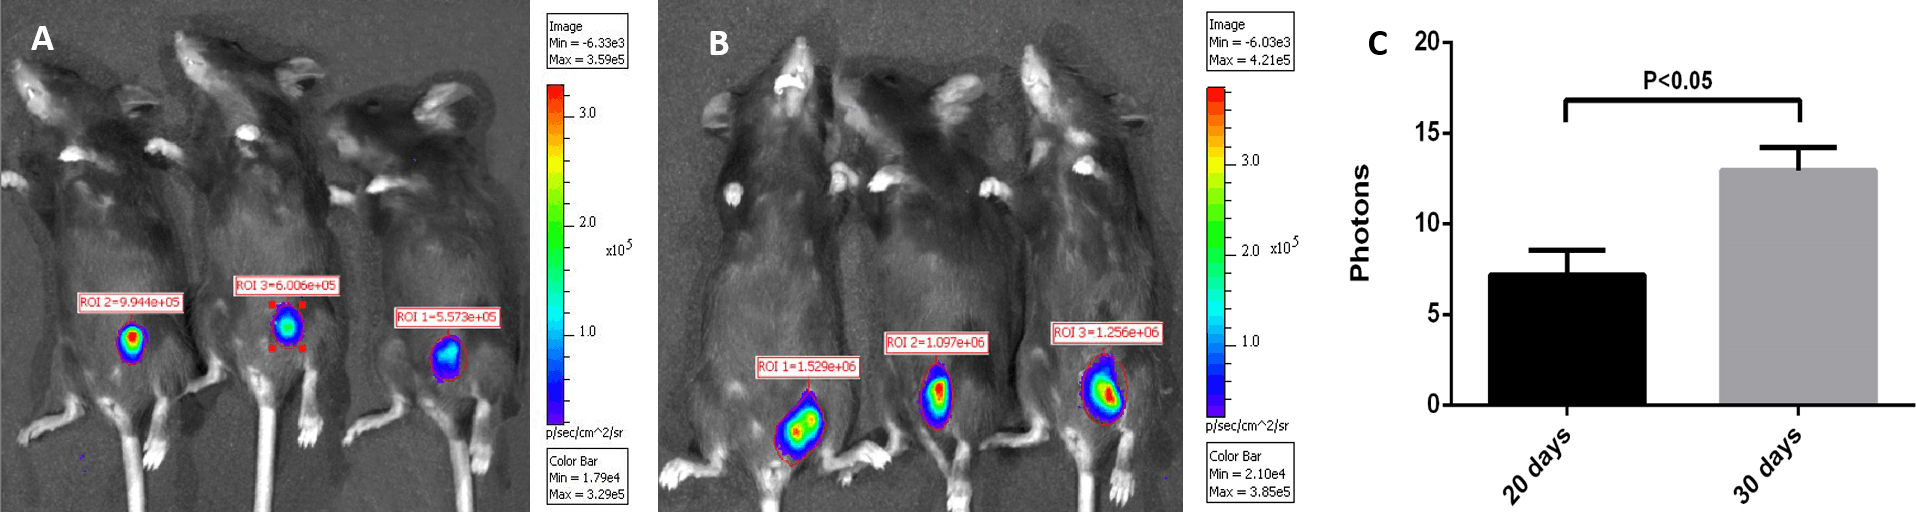 IVIS images of 3 mice 20 d and 30 d after subcutaneous injection of 2 × 107 C3-luc cells. Chloral hydrate (10%) was intraperitoneally injected at 100 μL/mouse to anesthetize the mice. D-luciferin at a concentration of 150 mg/kg in sterile phosphate-buffered saline was injected after they were fully anesthetized. Animals were imaged for 180 s at a binning value of 8 and an FVO of 12.8 cm, 10 min after the injection of D-luciferin. Statistical analysis of photon levels was performed using an unpaired t-test (P < 0.05). Results of statistical analysis indicated that tumor size increased with time, and the correlation was significant. Source: <b>C3-Luc Cells Are an Excellent Model for Evaluation of Cellular Immunity following HPV16L1 Vaccination</b>. by Li L-L, Wang H-R, Zhou Z-Y, Luo J, Wang X-L, Xiao X-Q, et al. <em>PLoS ONE</em> 11(2). Feb. 2016.